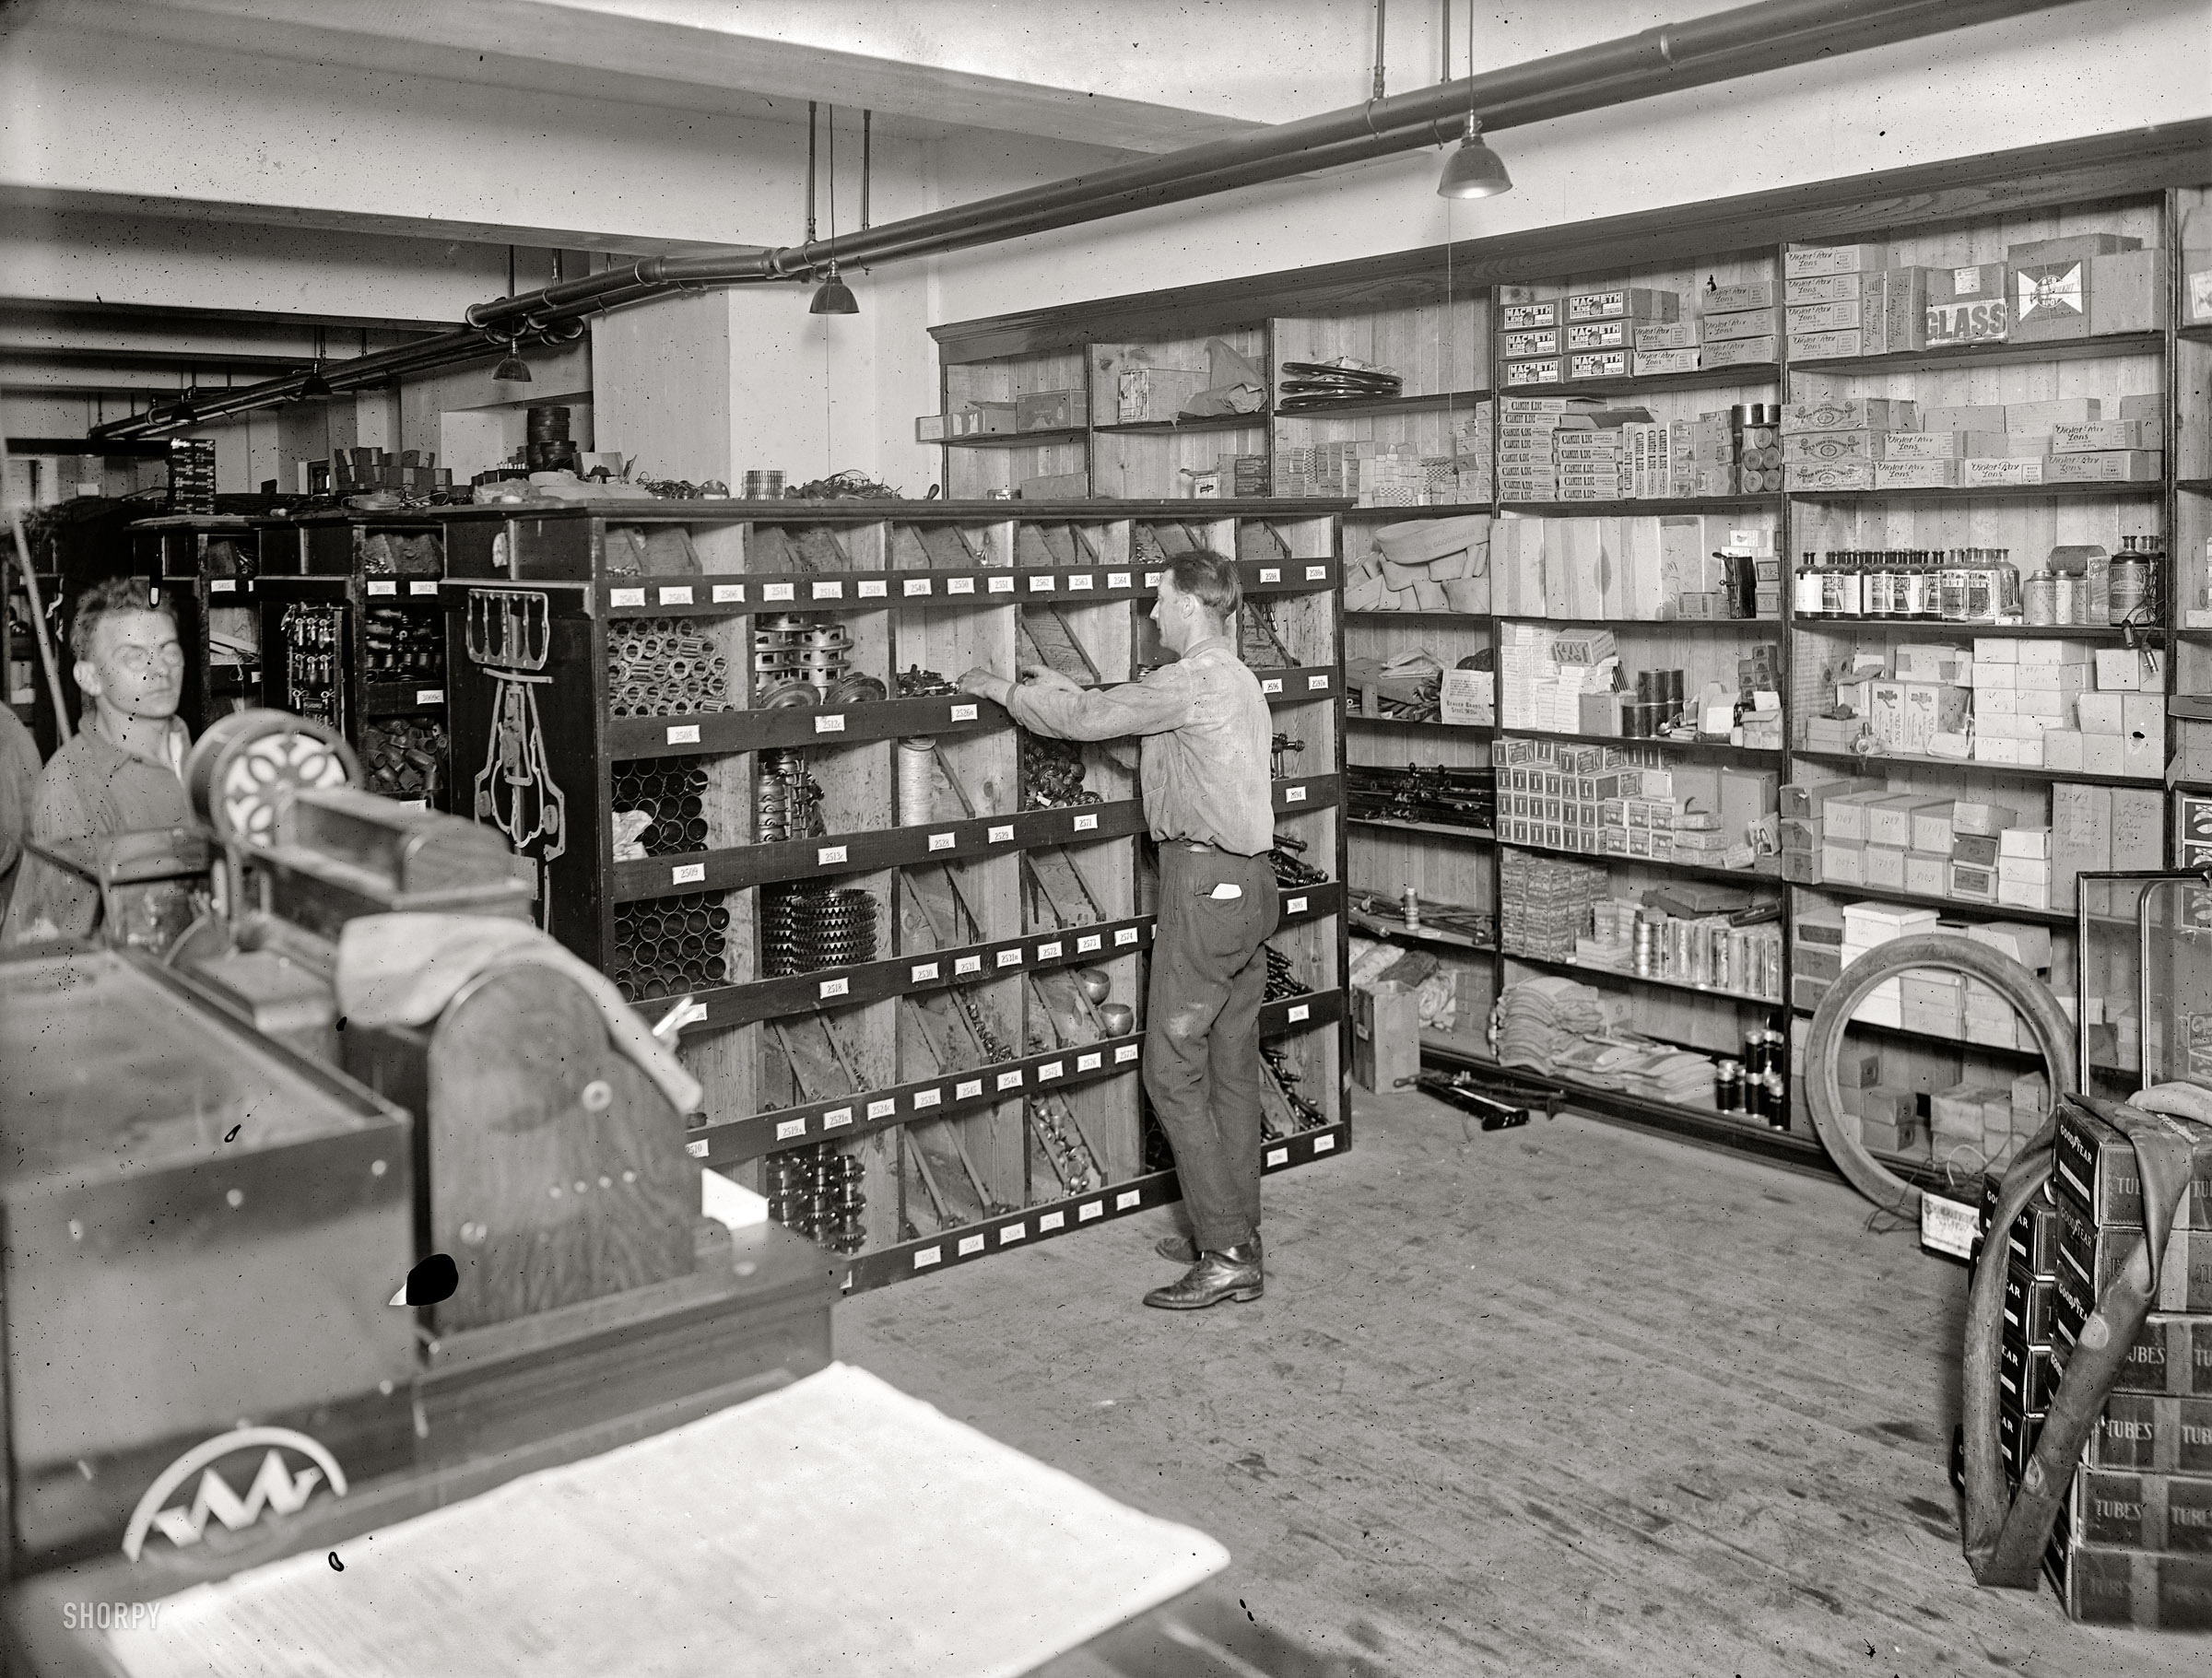 Washington, D.C. August 1920. "Steuart's Garage, stockroom, 12th Street N.E." National Photo Company Collection glass negative. View full size.